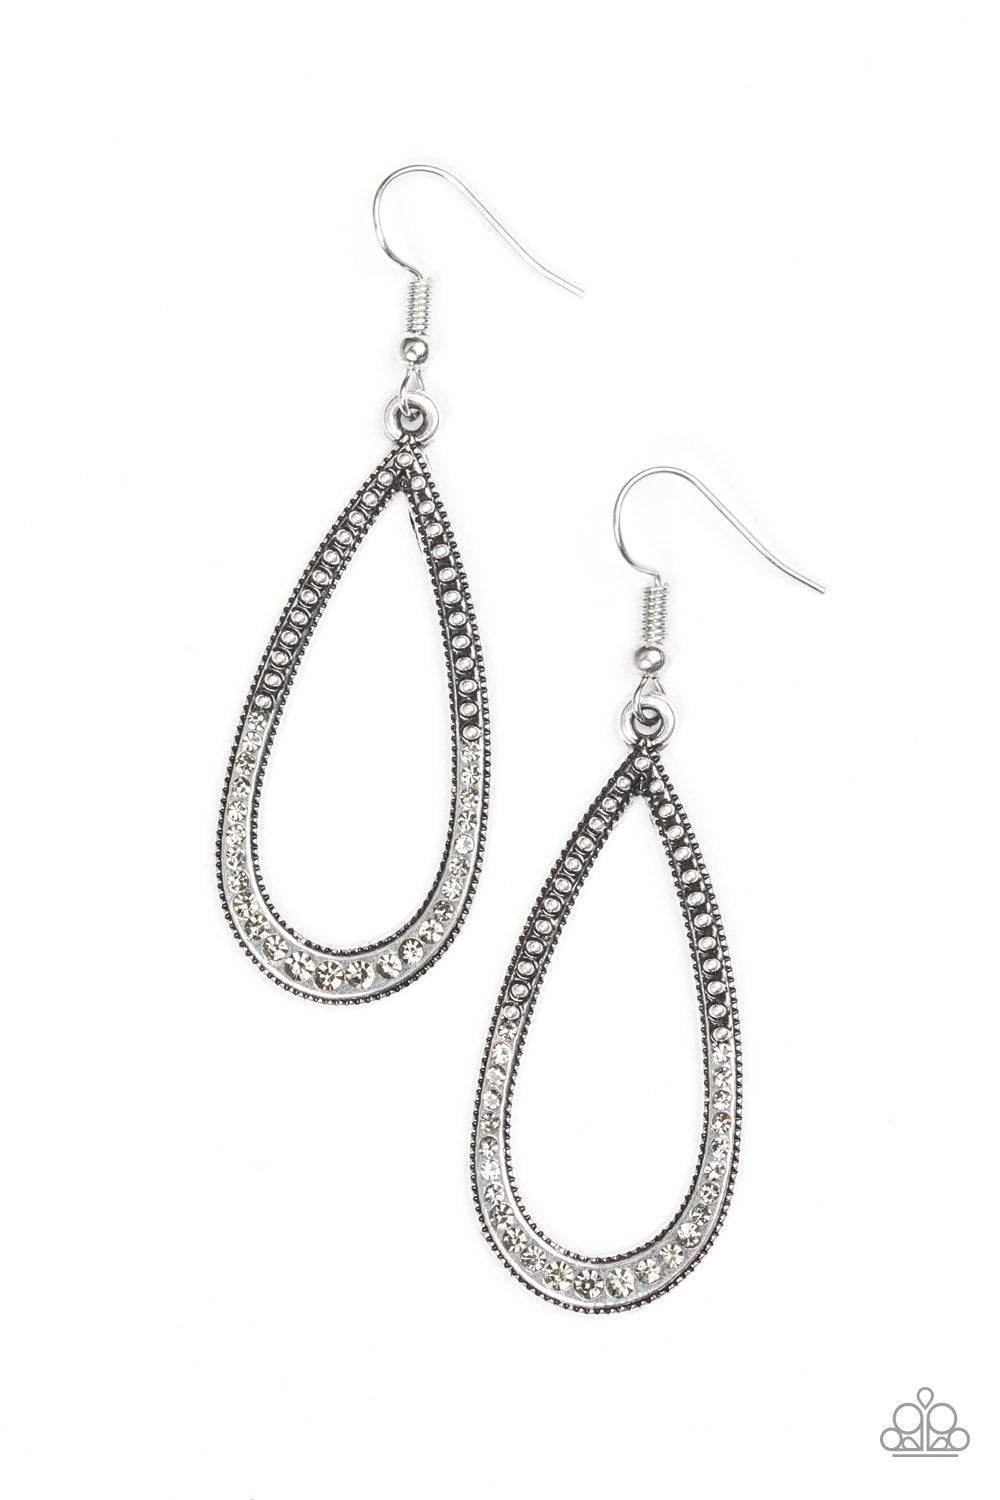 Dripping In Diamonds Silver and Rhinestone Teardrop Earrings - Paparazzi Accessories-CarasShop.com - $5 Jewelry by Cara Jewels